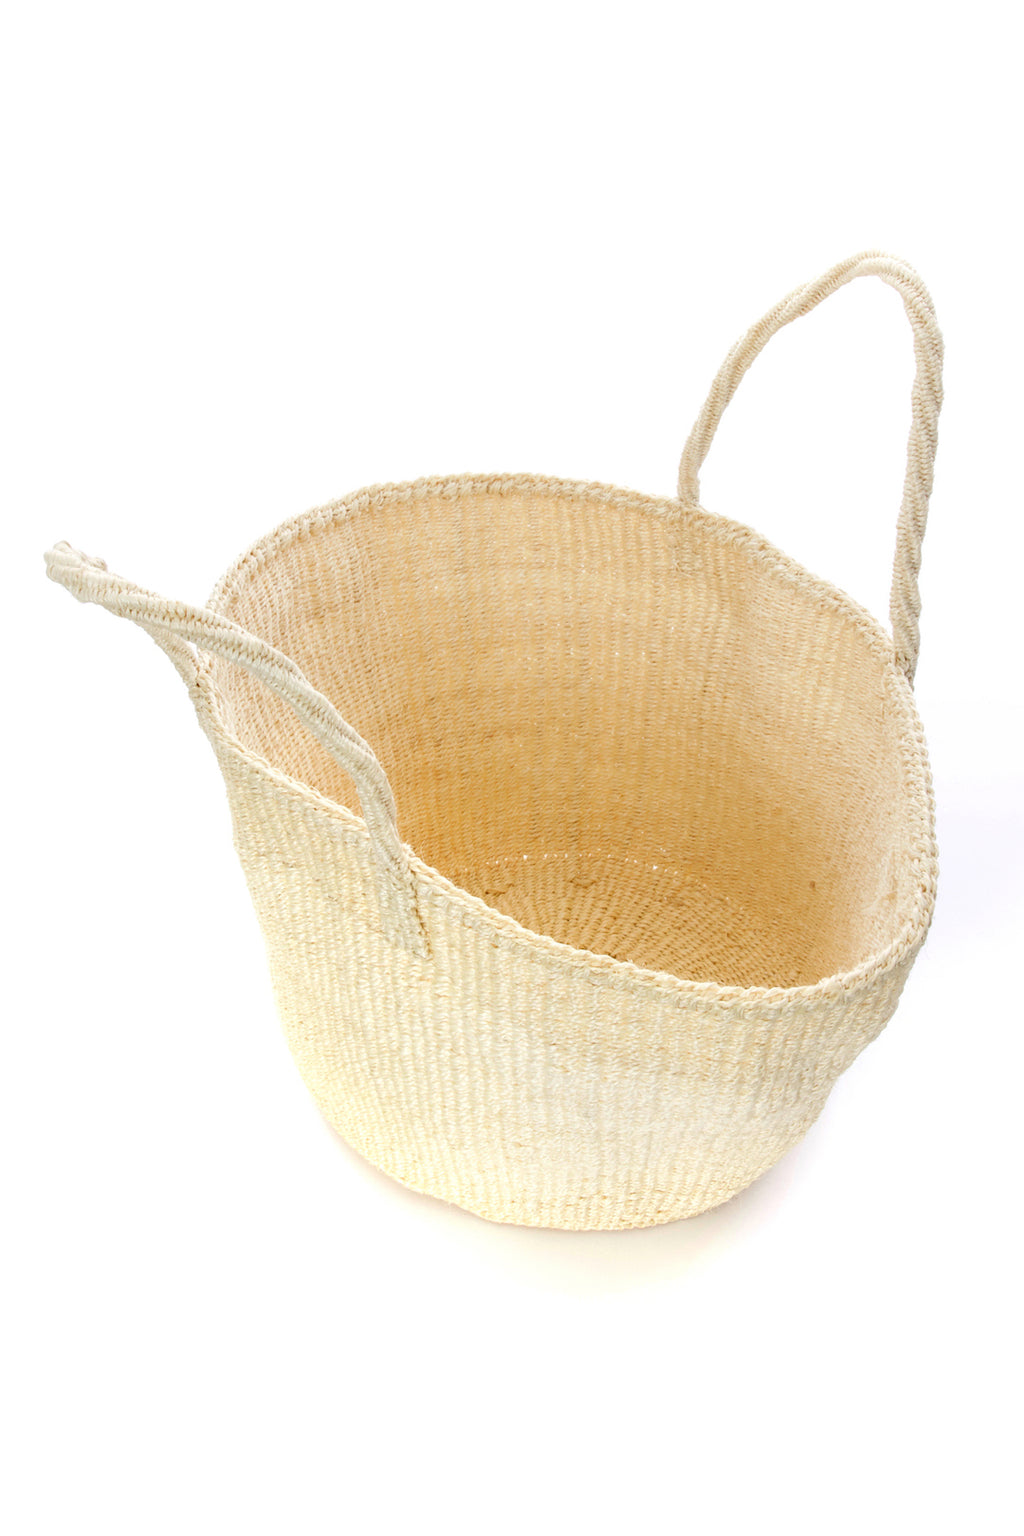 Natural Ivory Classic Sisal Tote